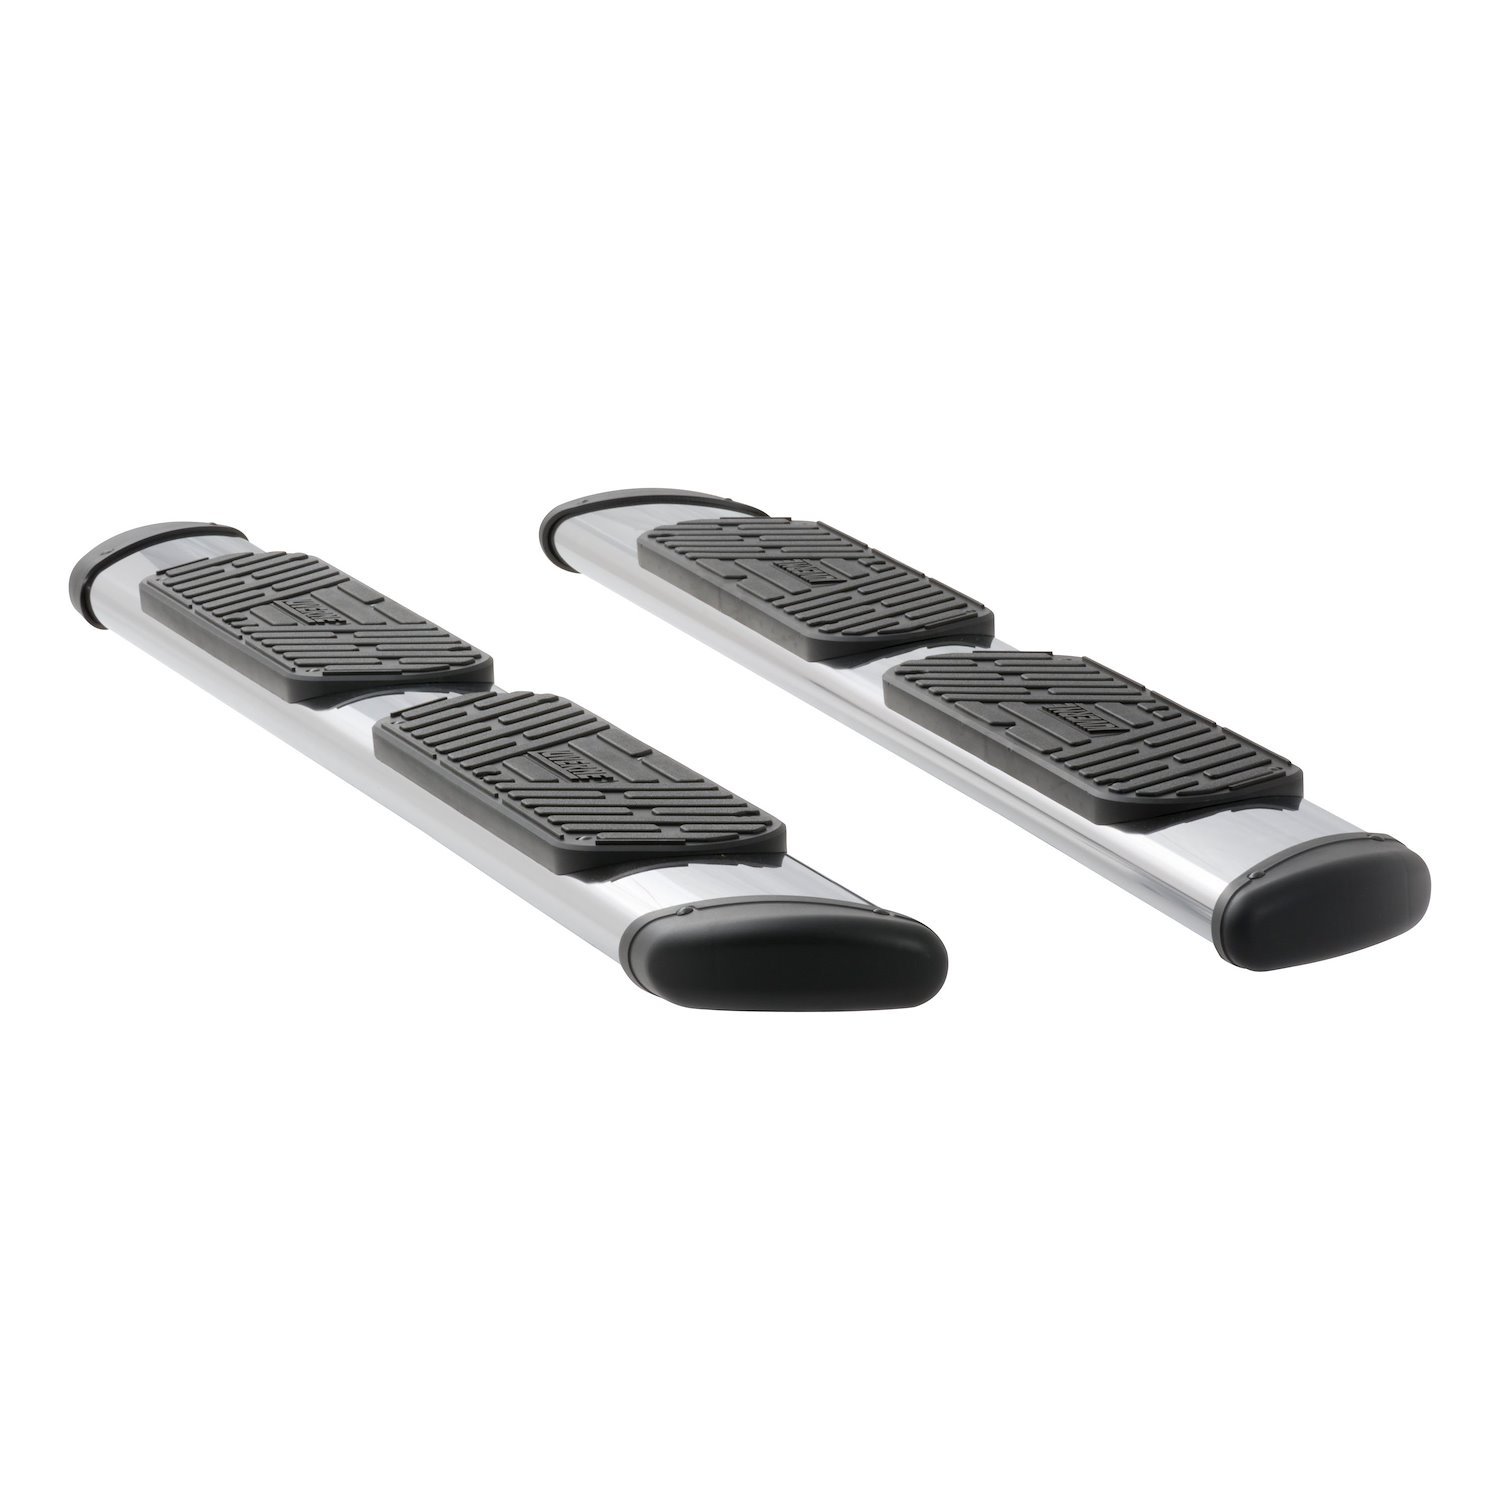 477078-401443 Regal 7 Polished Stainless 78 in. Oval Side Steps Fits Select Chevy Silverado, GMC Sierra